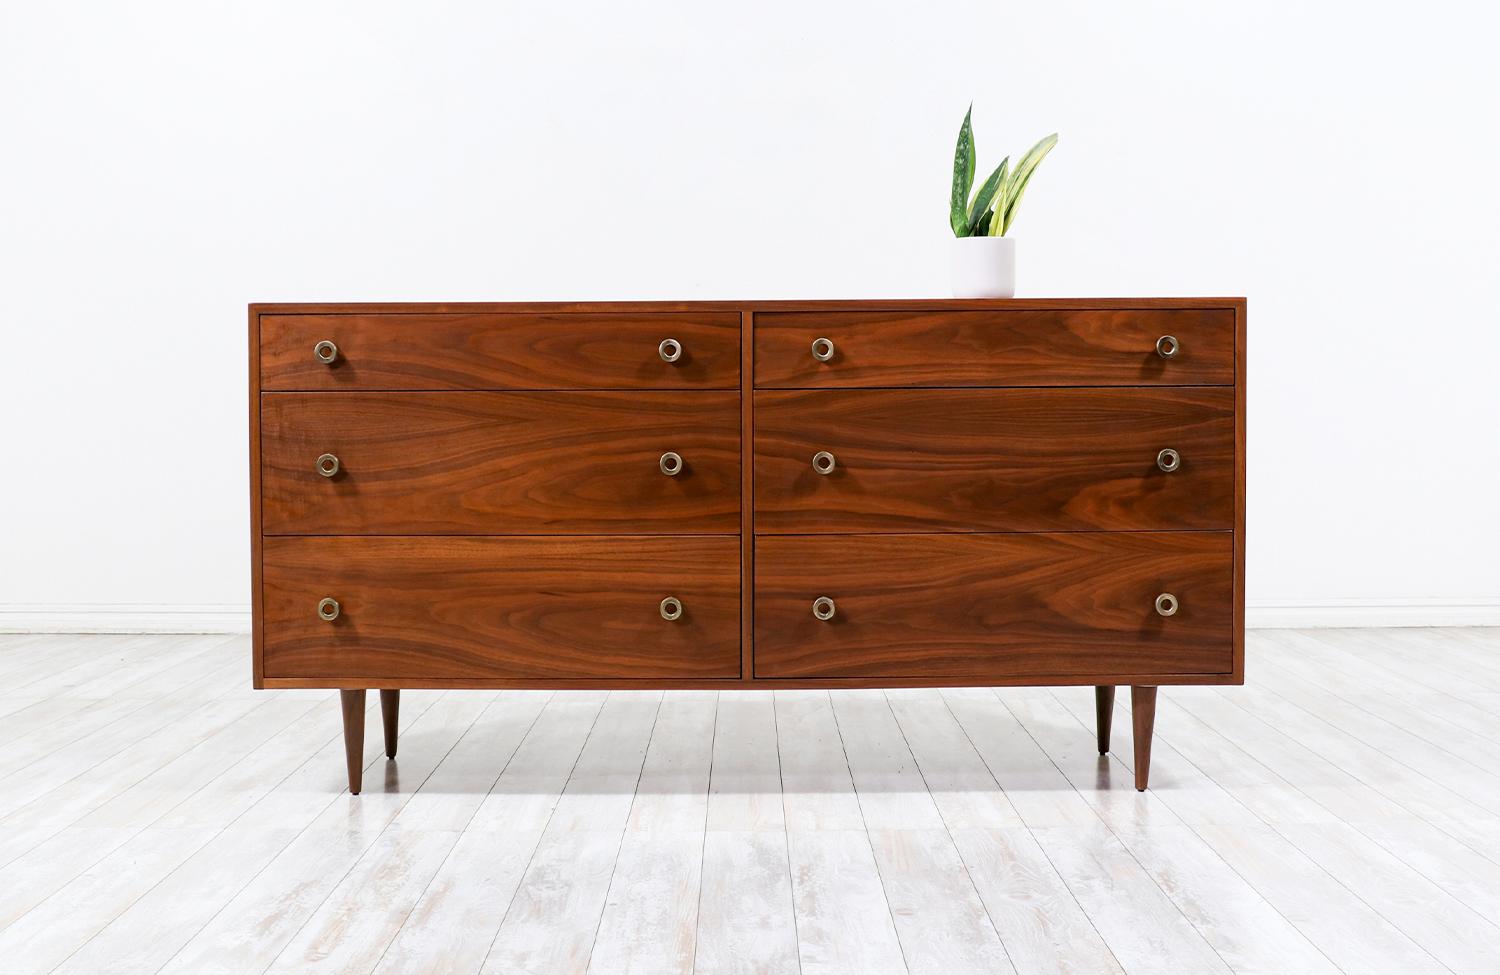 Transforming a piece of Mid-Century Modern furniture is like bringing history back to life, and we take this journey with passion and precision. With over 17 years of artisanal expertise, our Los Angeles studio is a haven where vintage treasures are